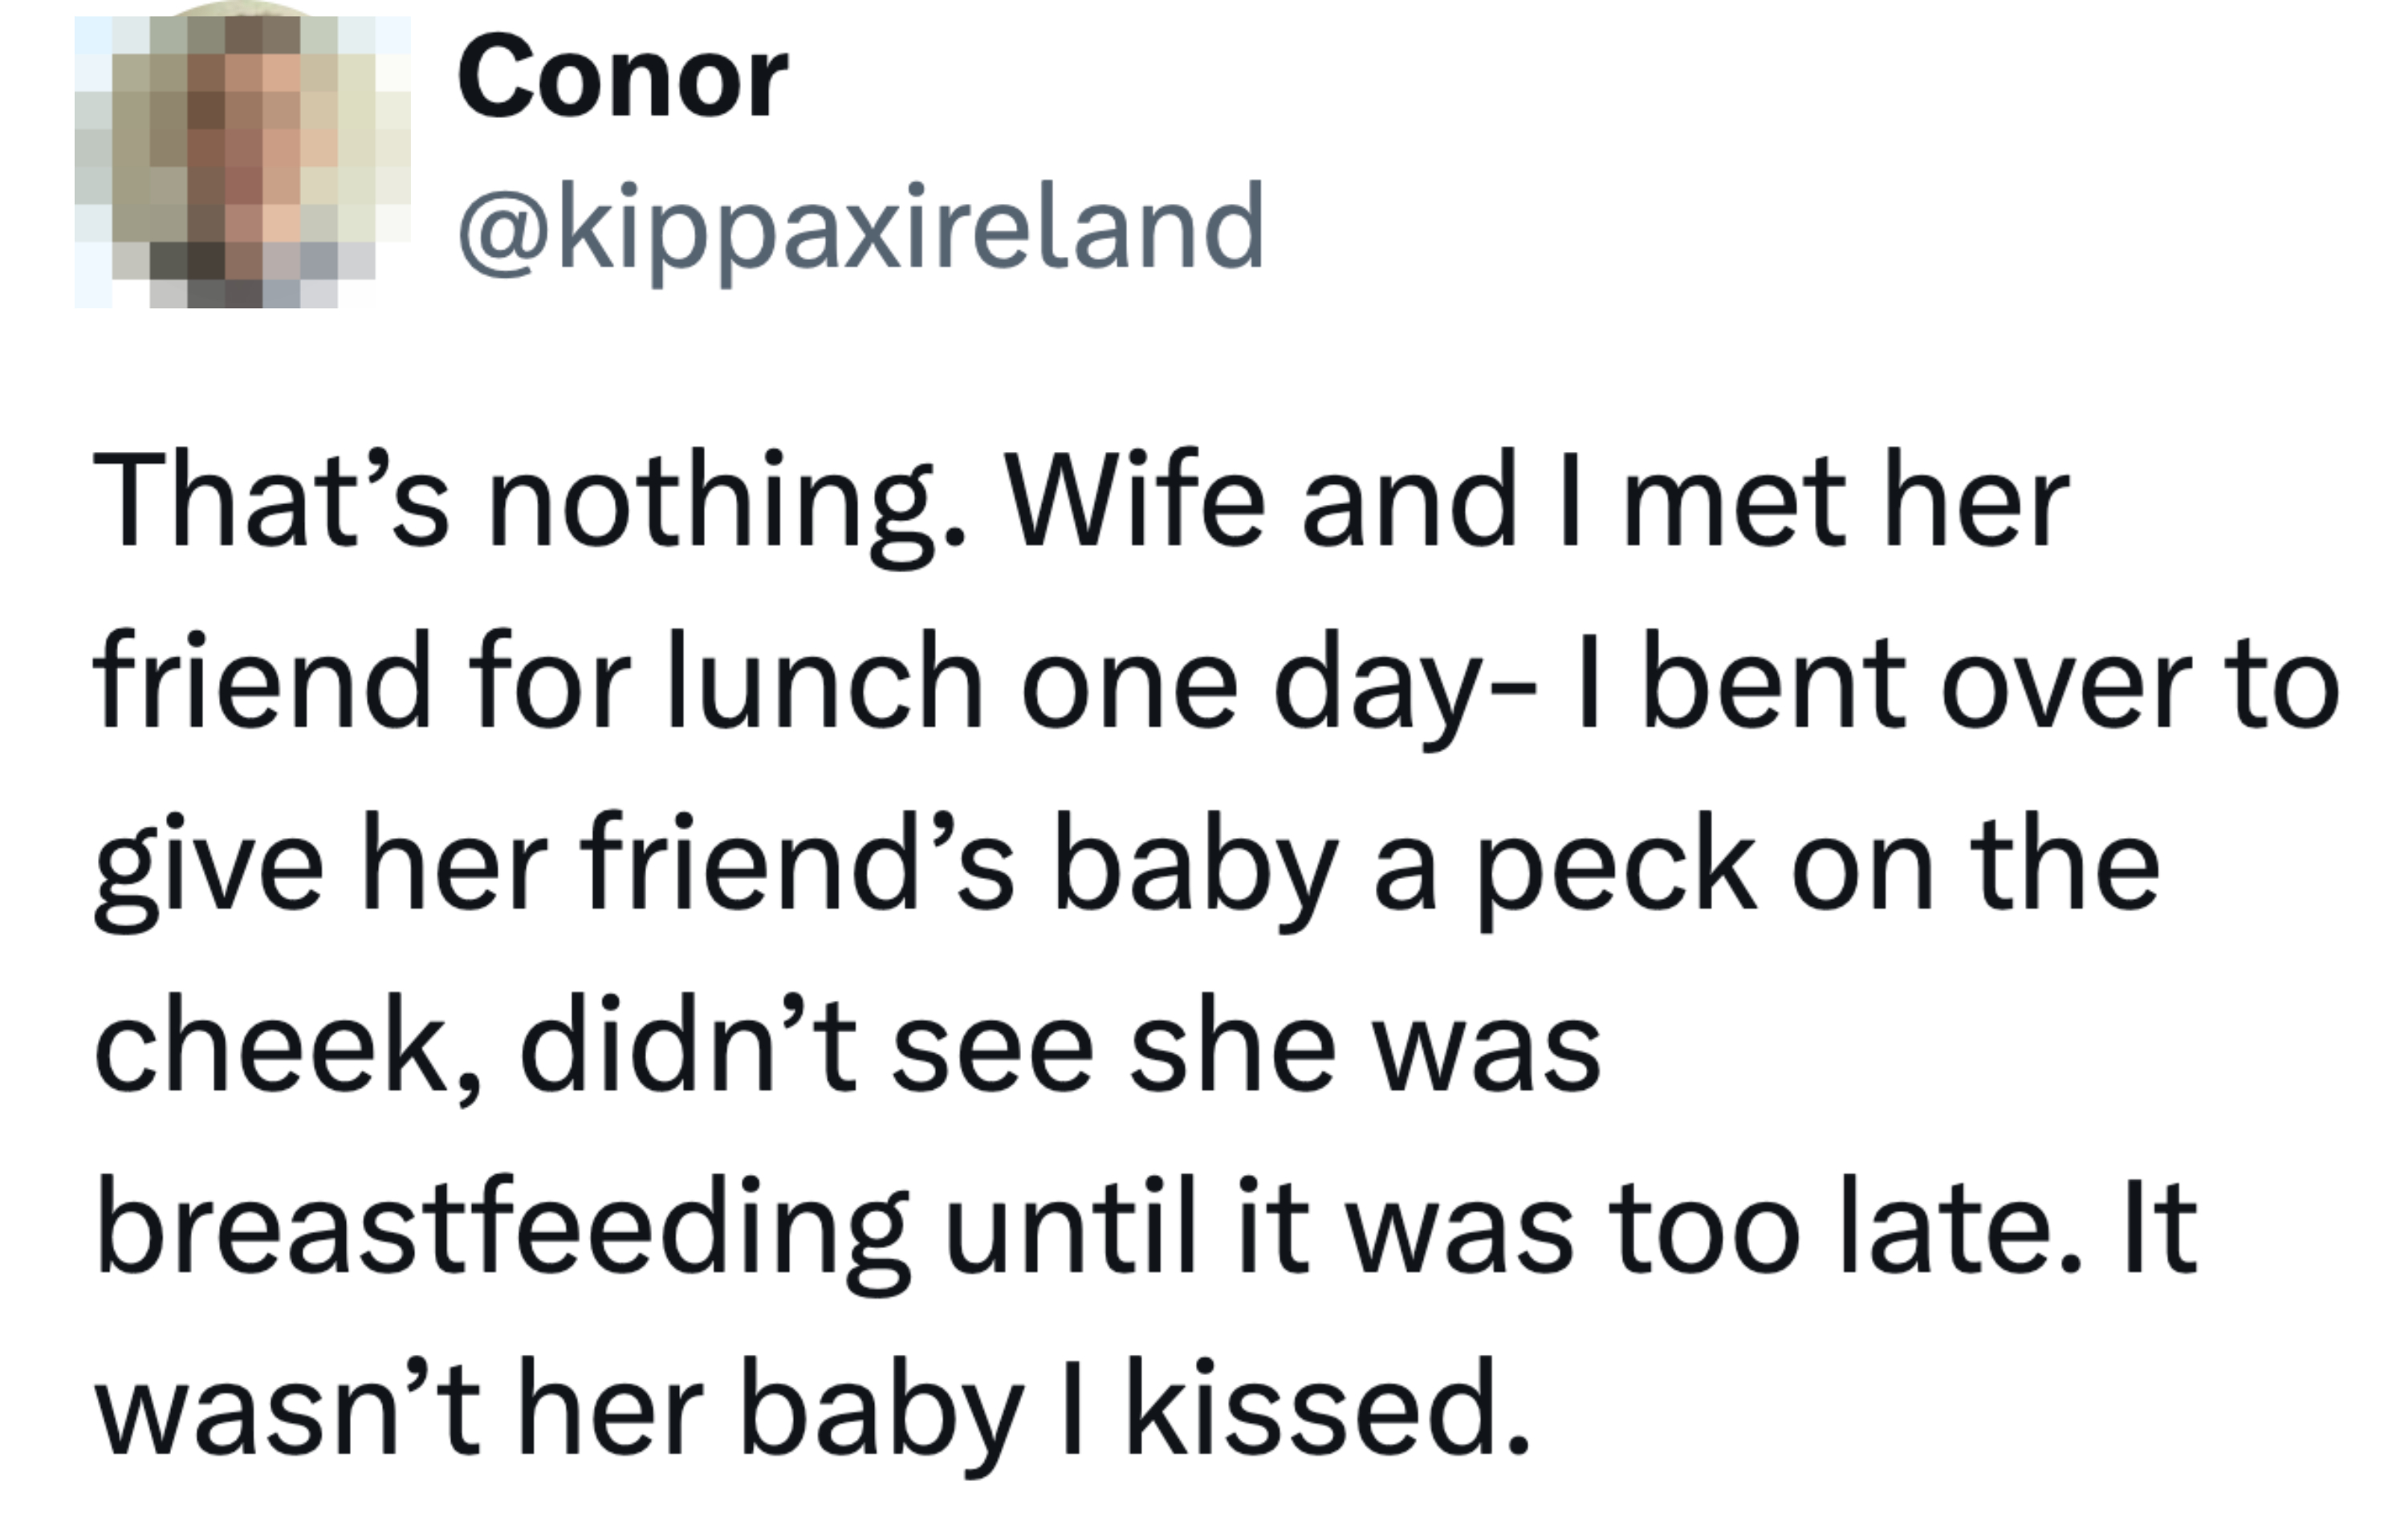 Tweet: Person recounts awkwardly kissing a friend&#x27;s baby on the cheek during breastfeeding without realizing